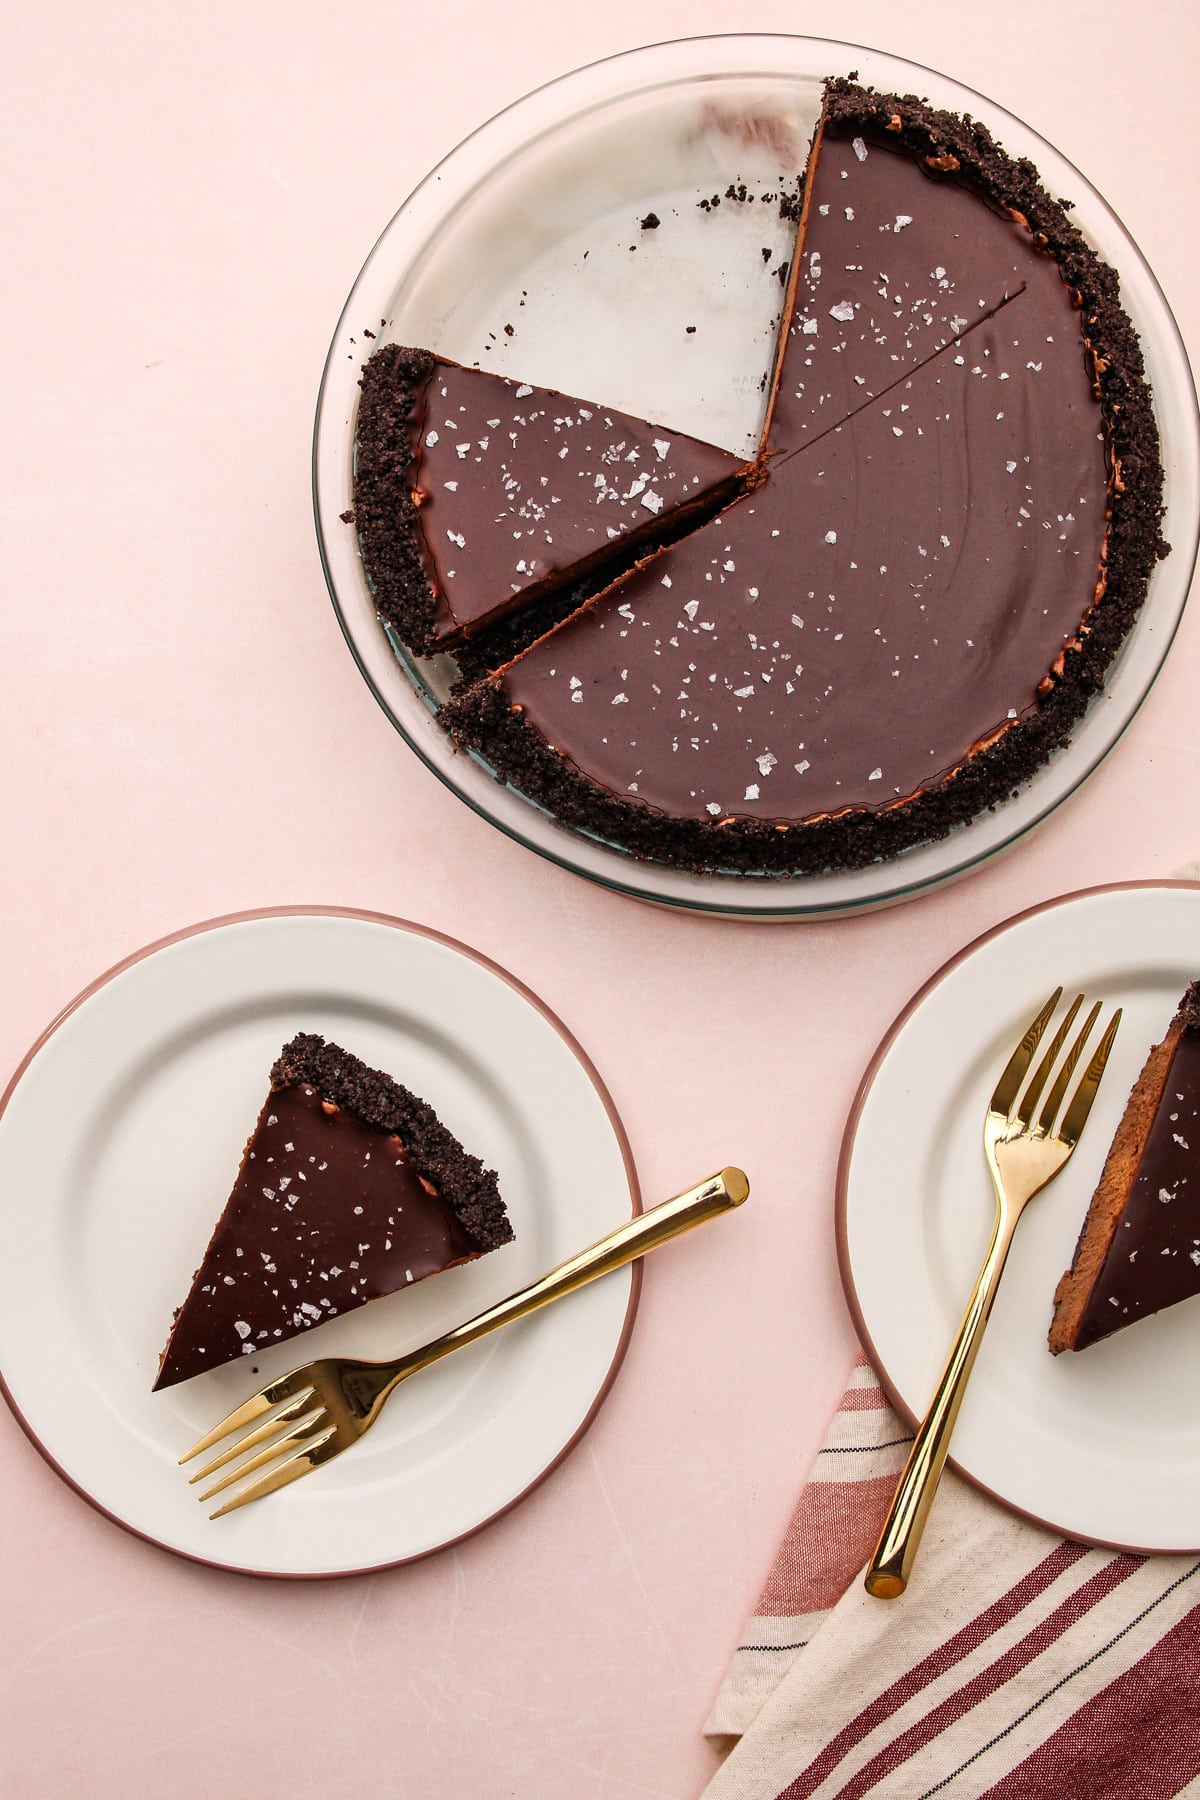 An easy chocolate pie in a pie plate, with slices next to it on small plates with forks.